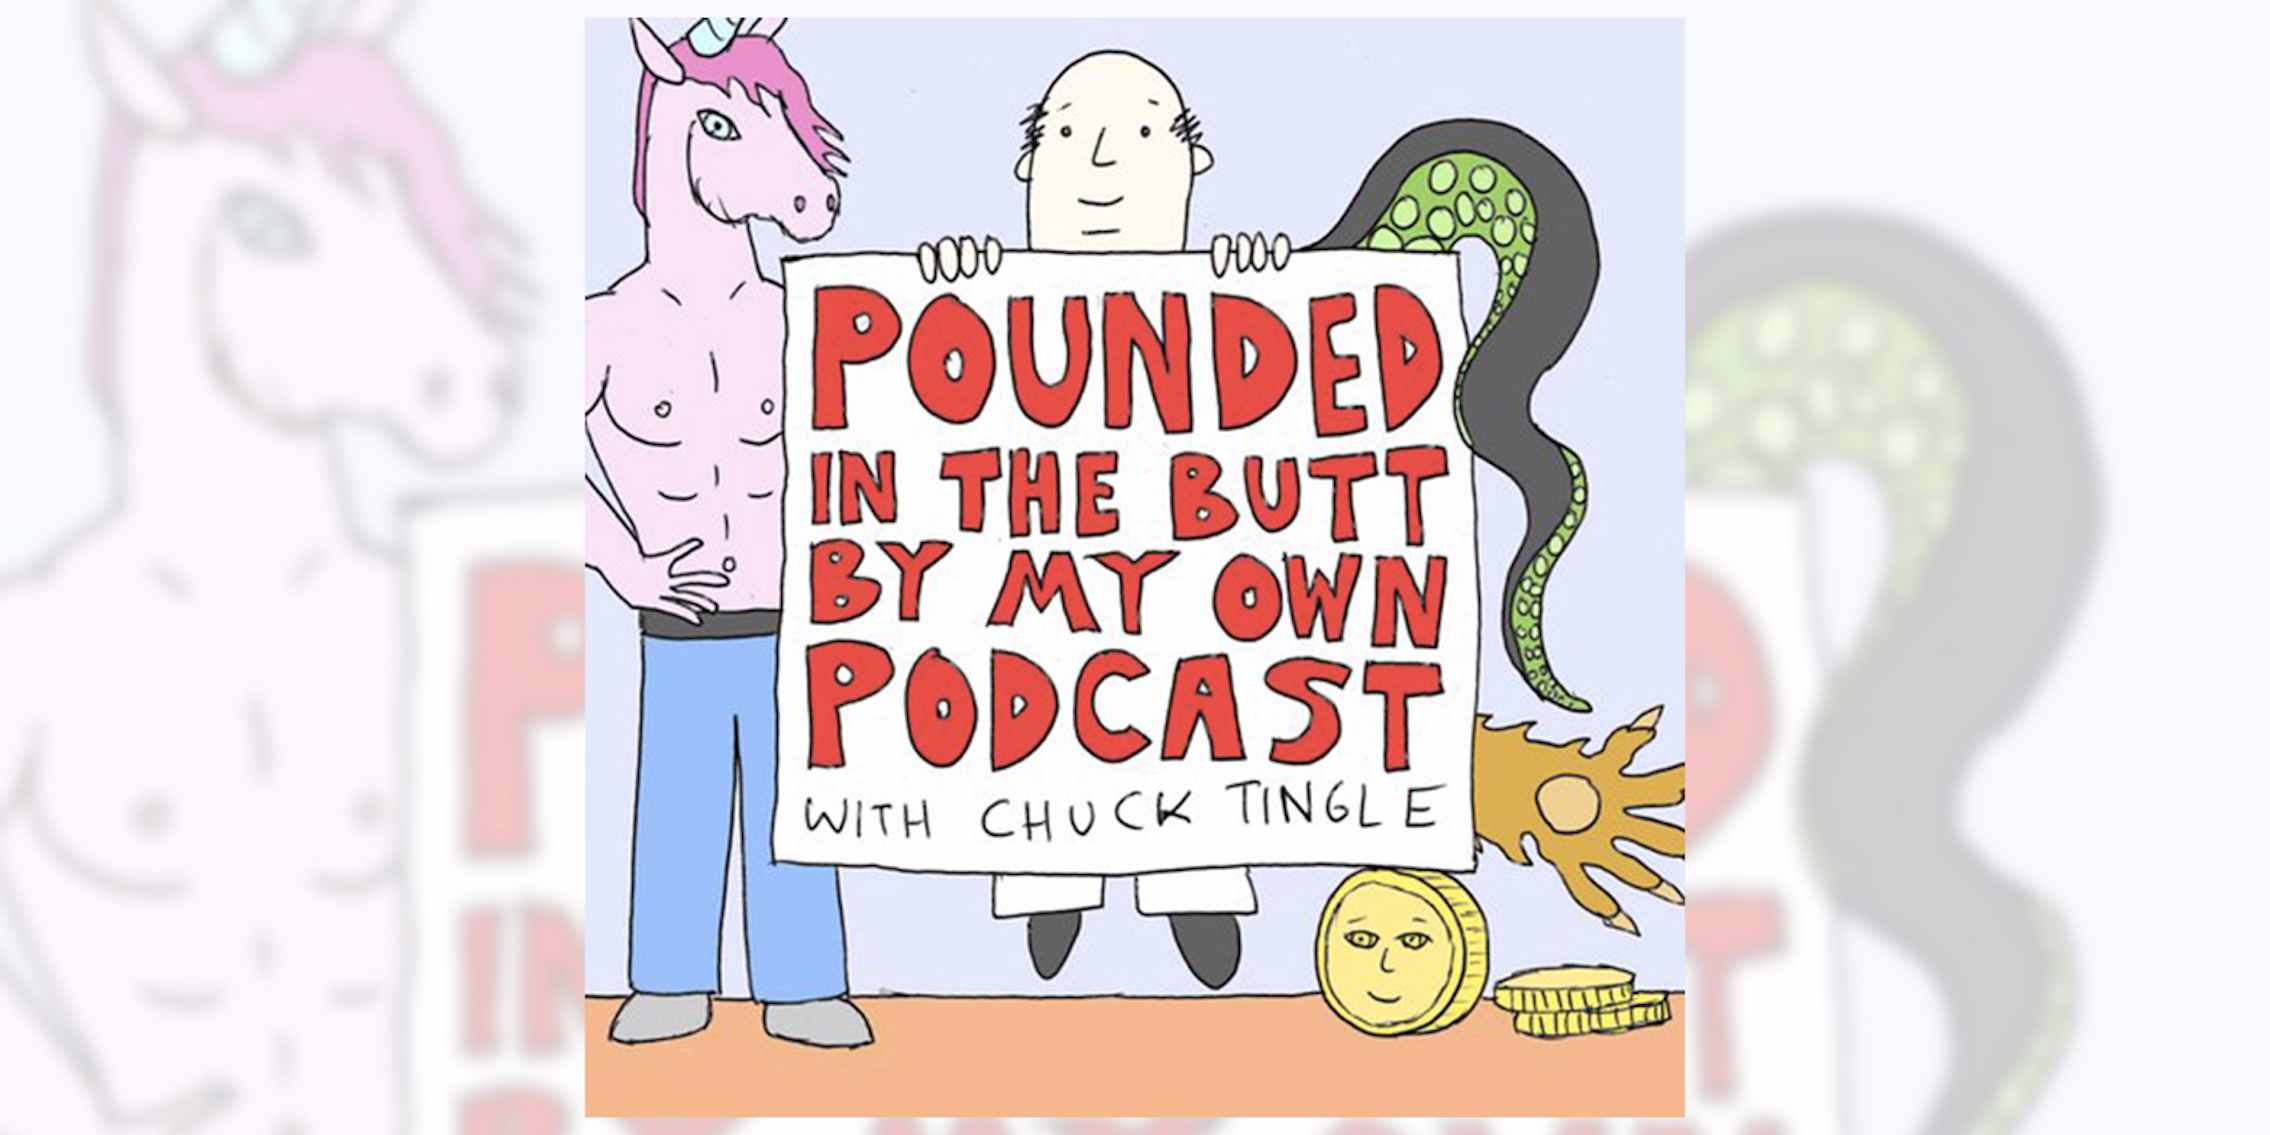 pounded in the butt chuck tingle podcast